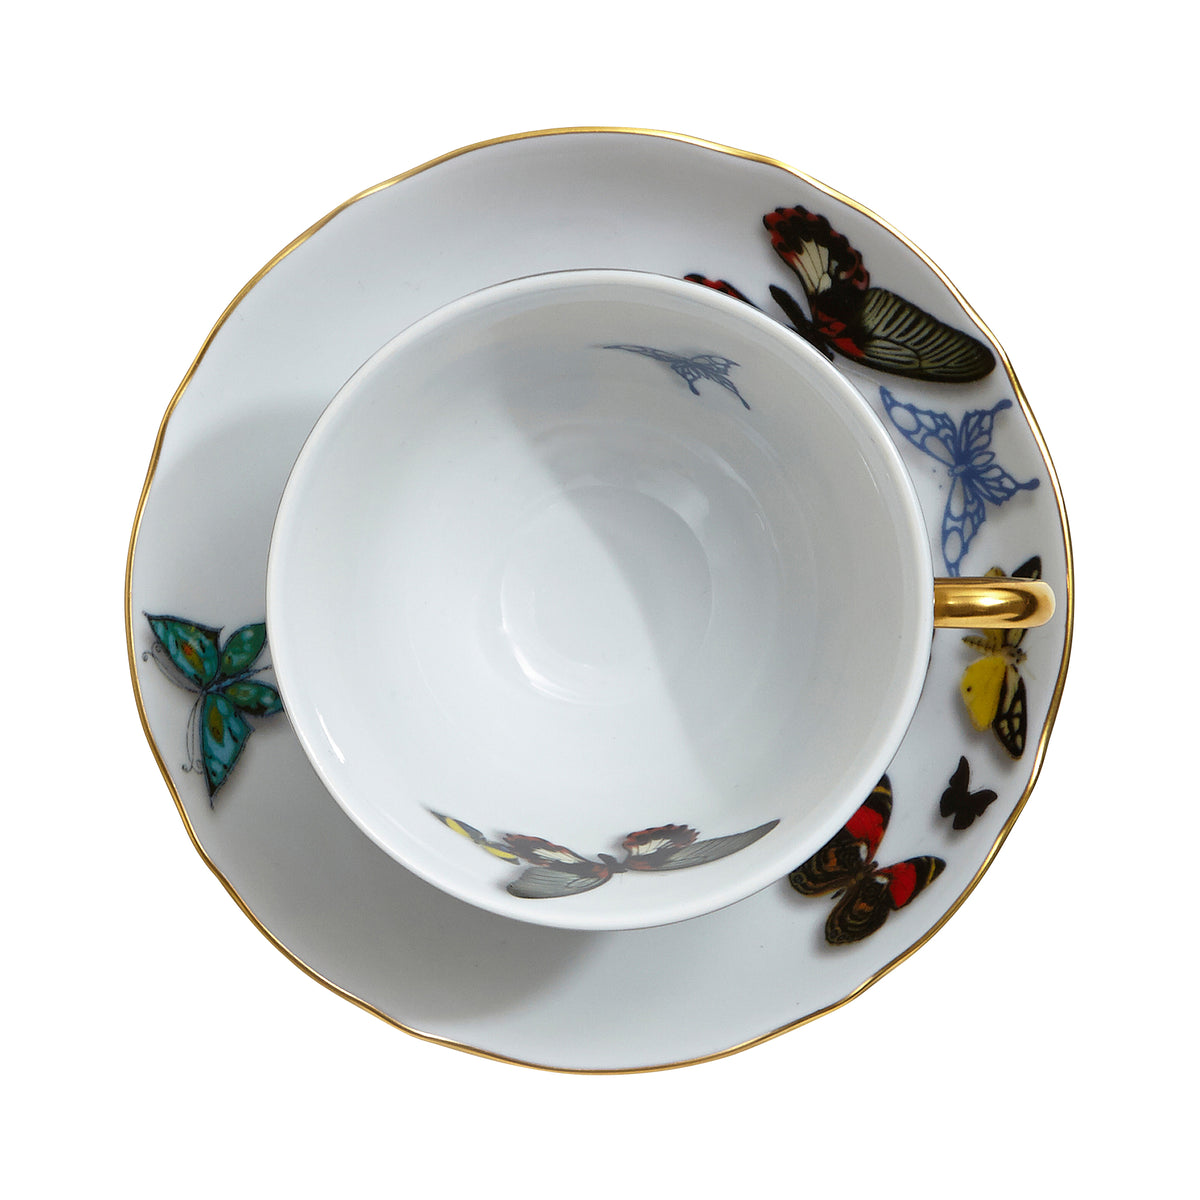 Butterfly Parade Tea Cup and Saucer